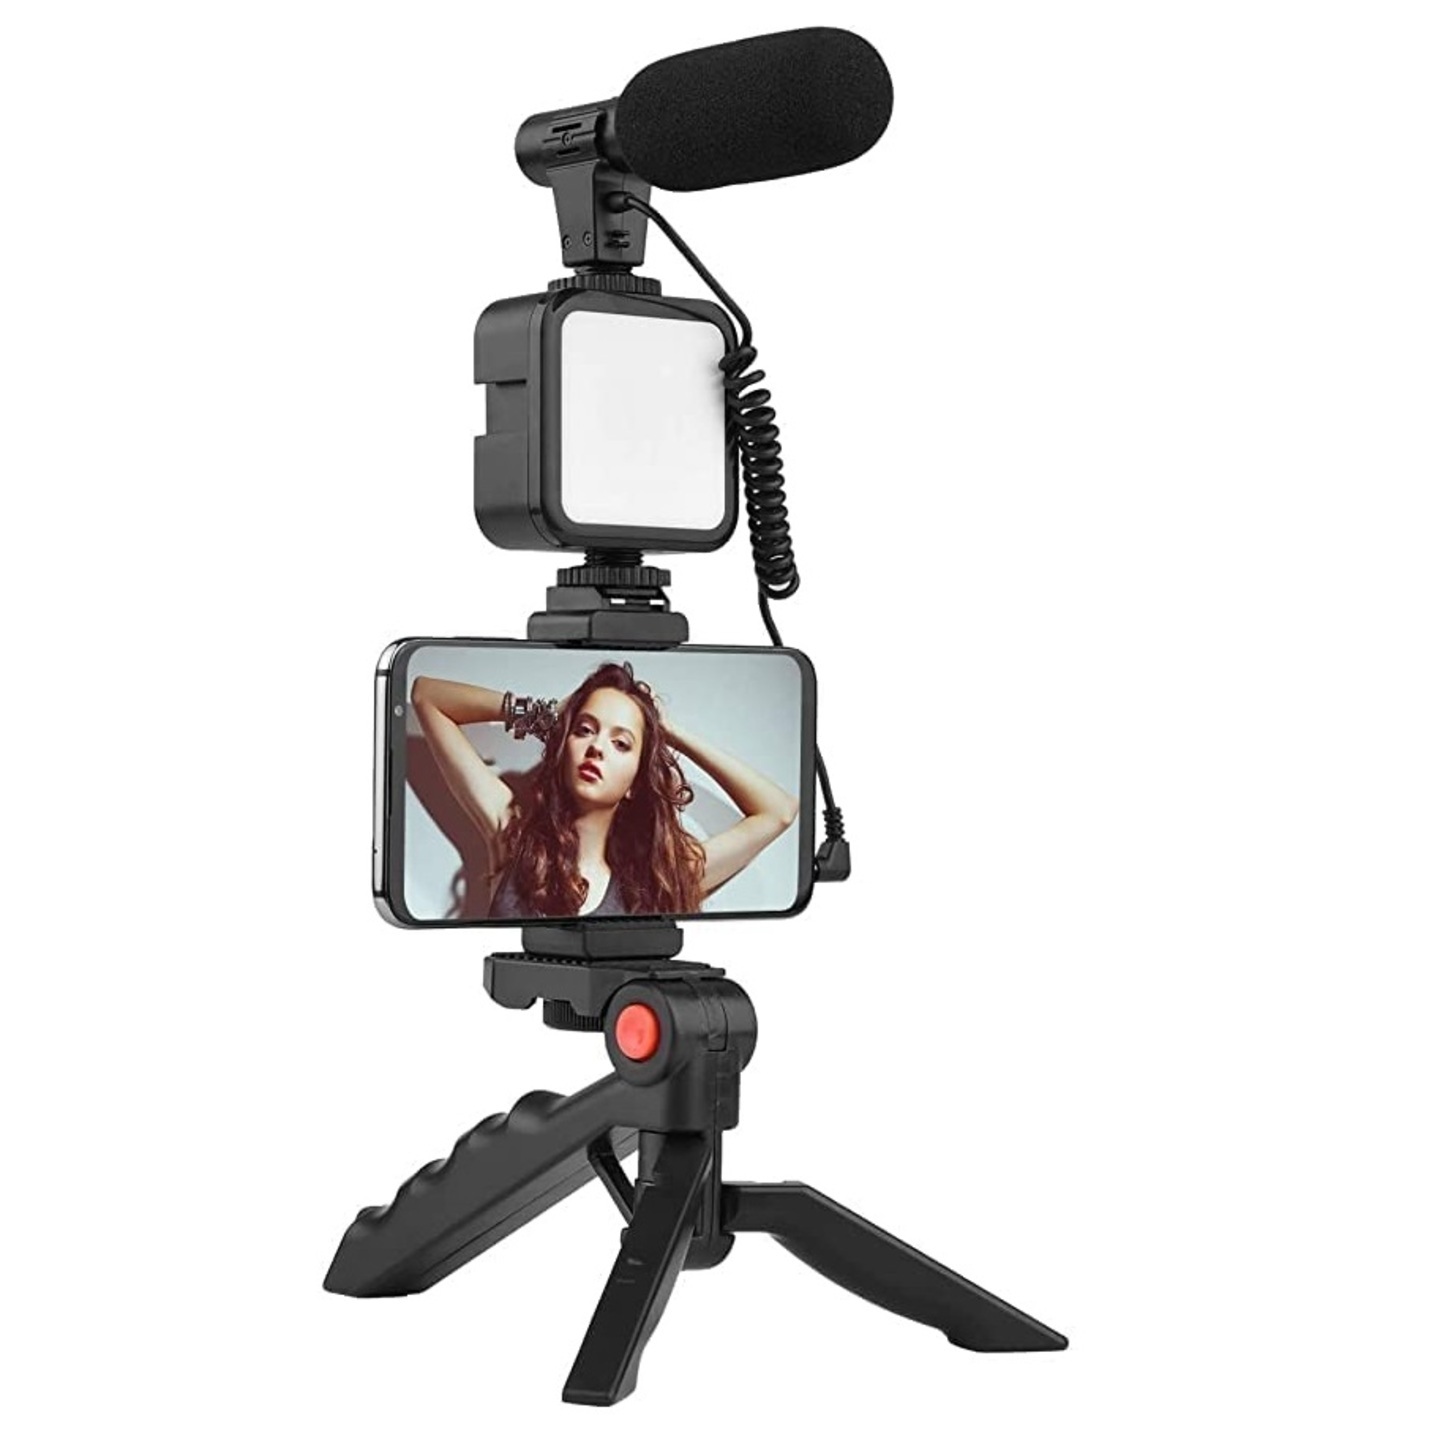 AY-19 Vlogging  Video Making kit with Shotgun Microphone, Selfie Light and Tripod Stand